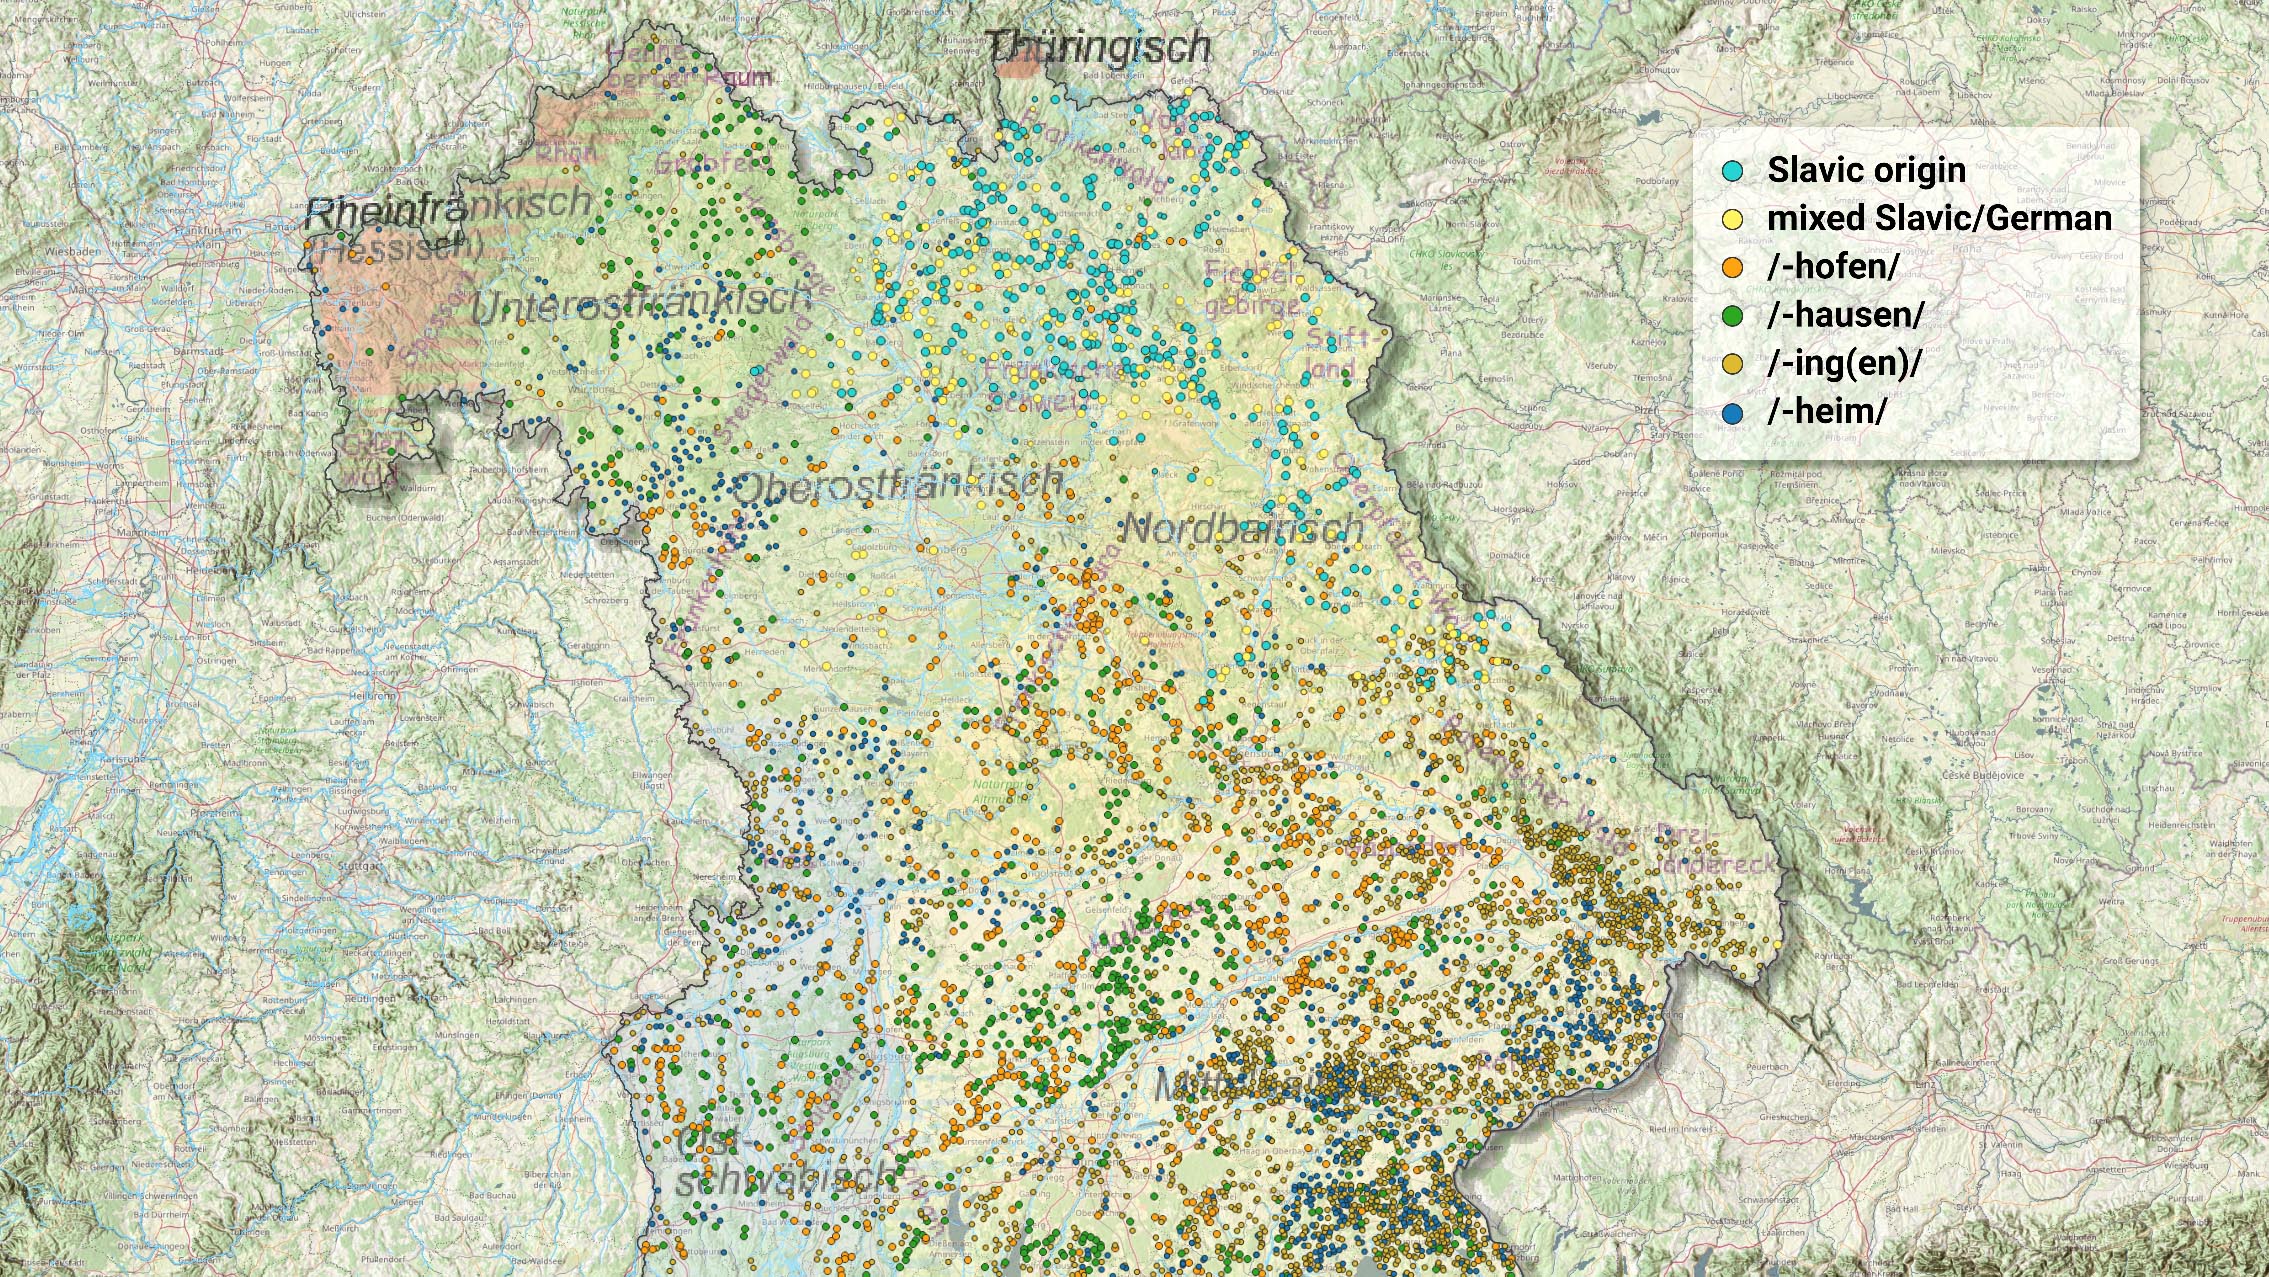 Early medieval settlement patterns in Bavaria